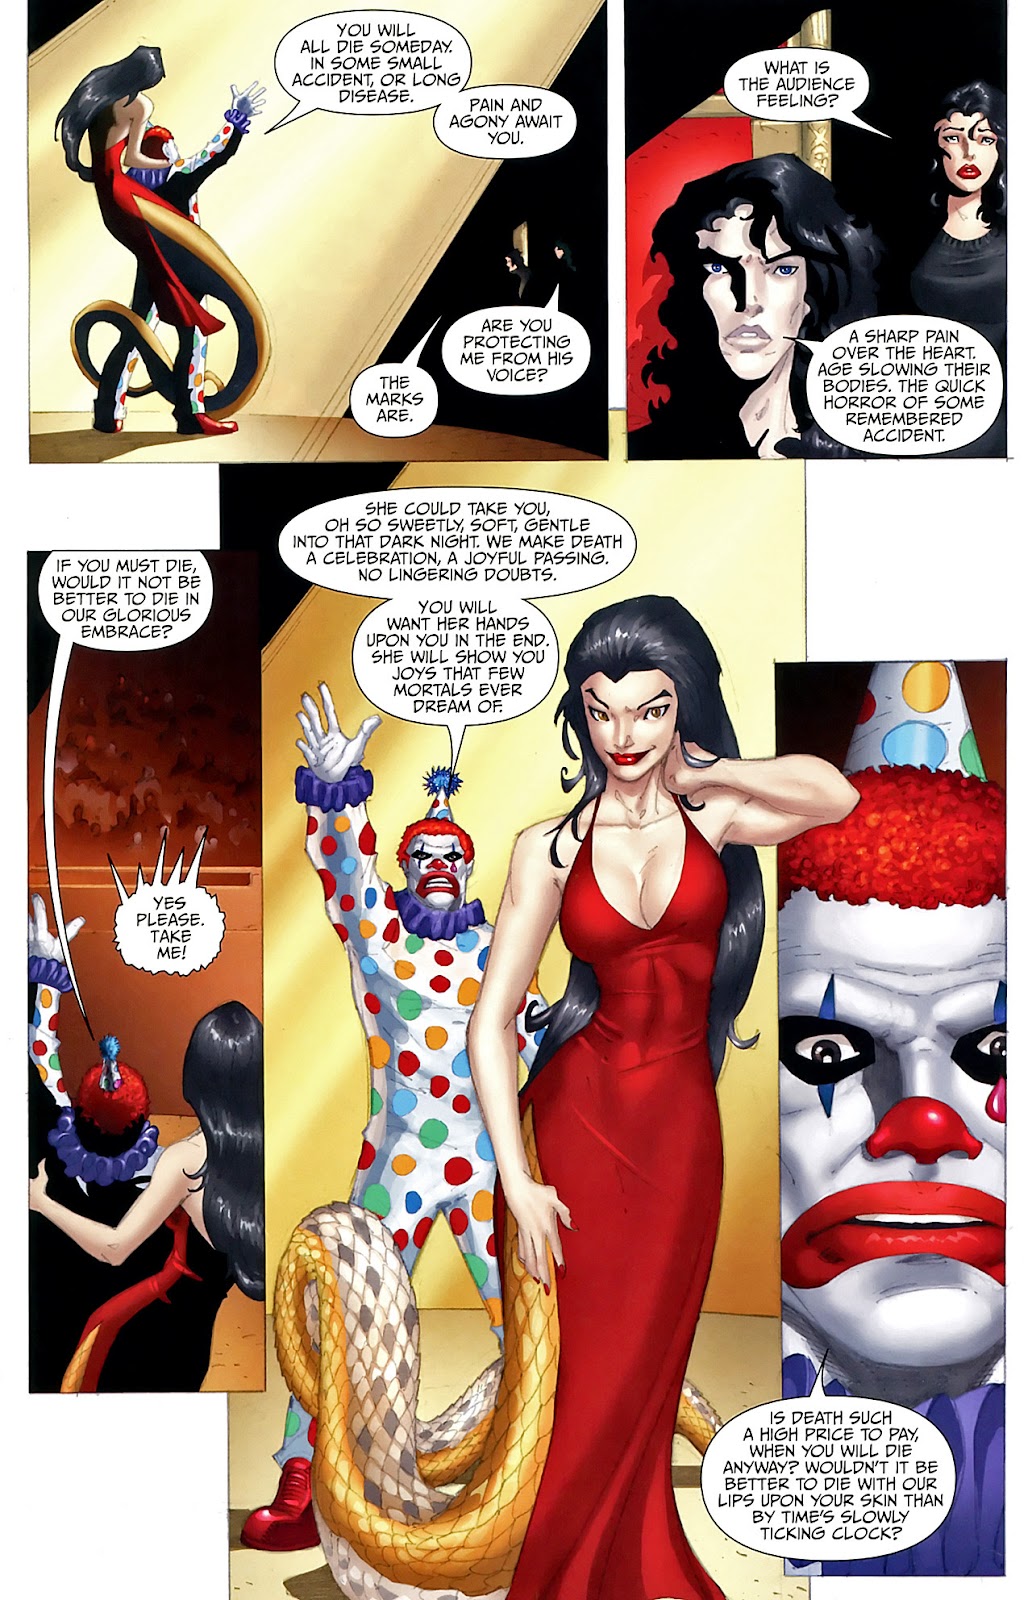 Anita Blake, Vampire Hunter: Circus of the Damned - The Scoundrel issue 4 - Page 18